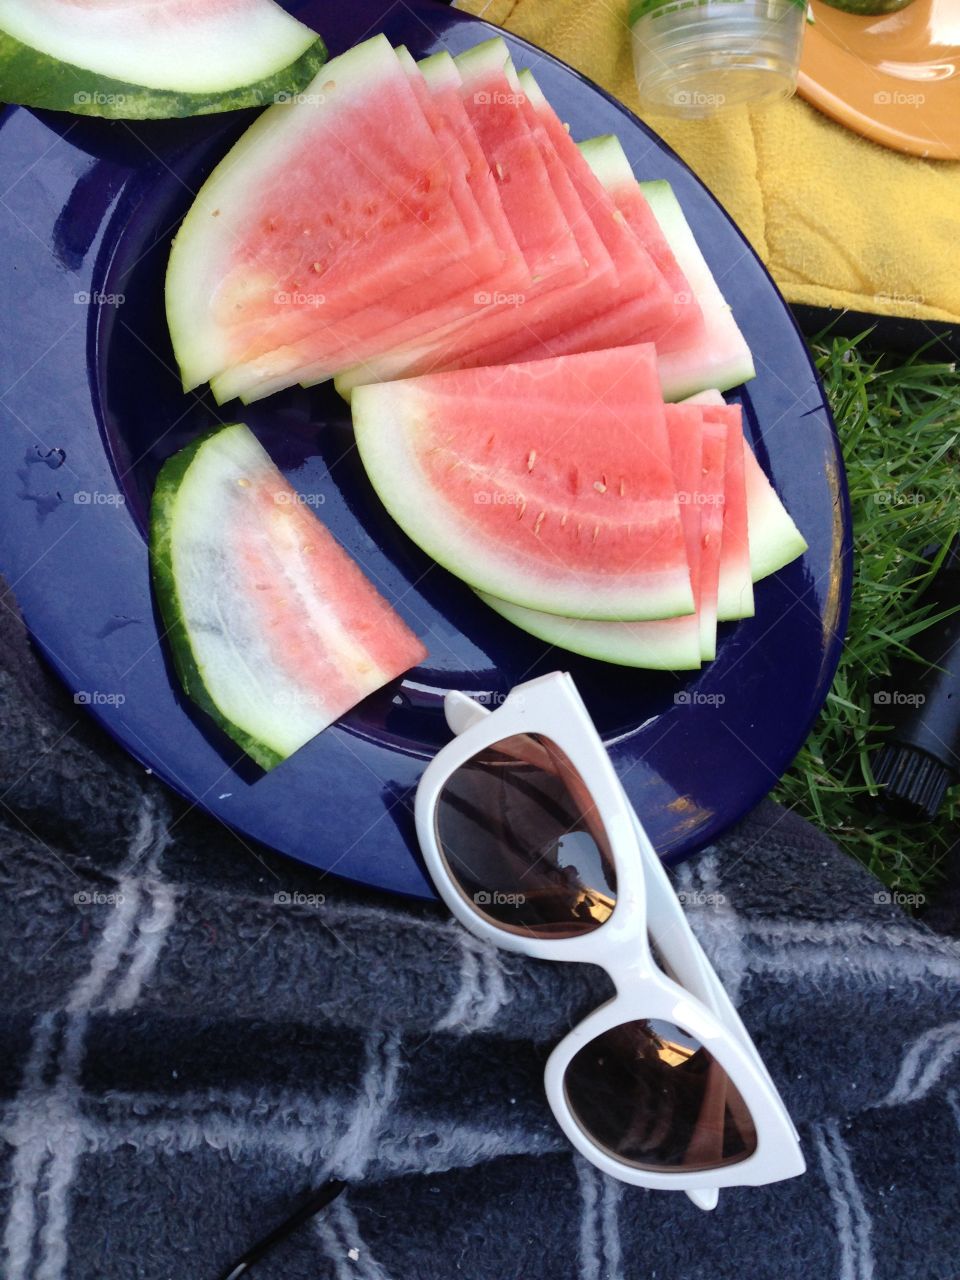 Summer Scene. Summer is watermelon wedges and white sunglasses on the grass.